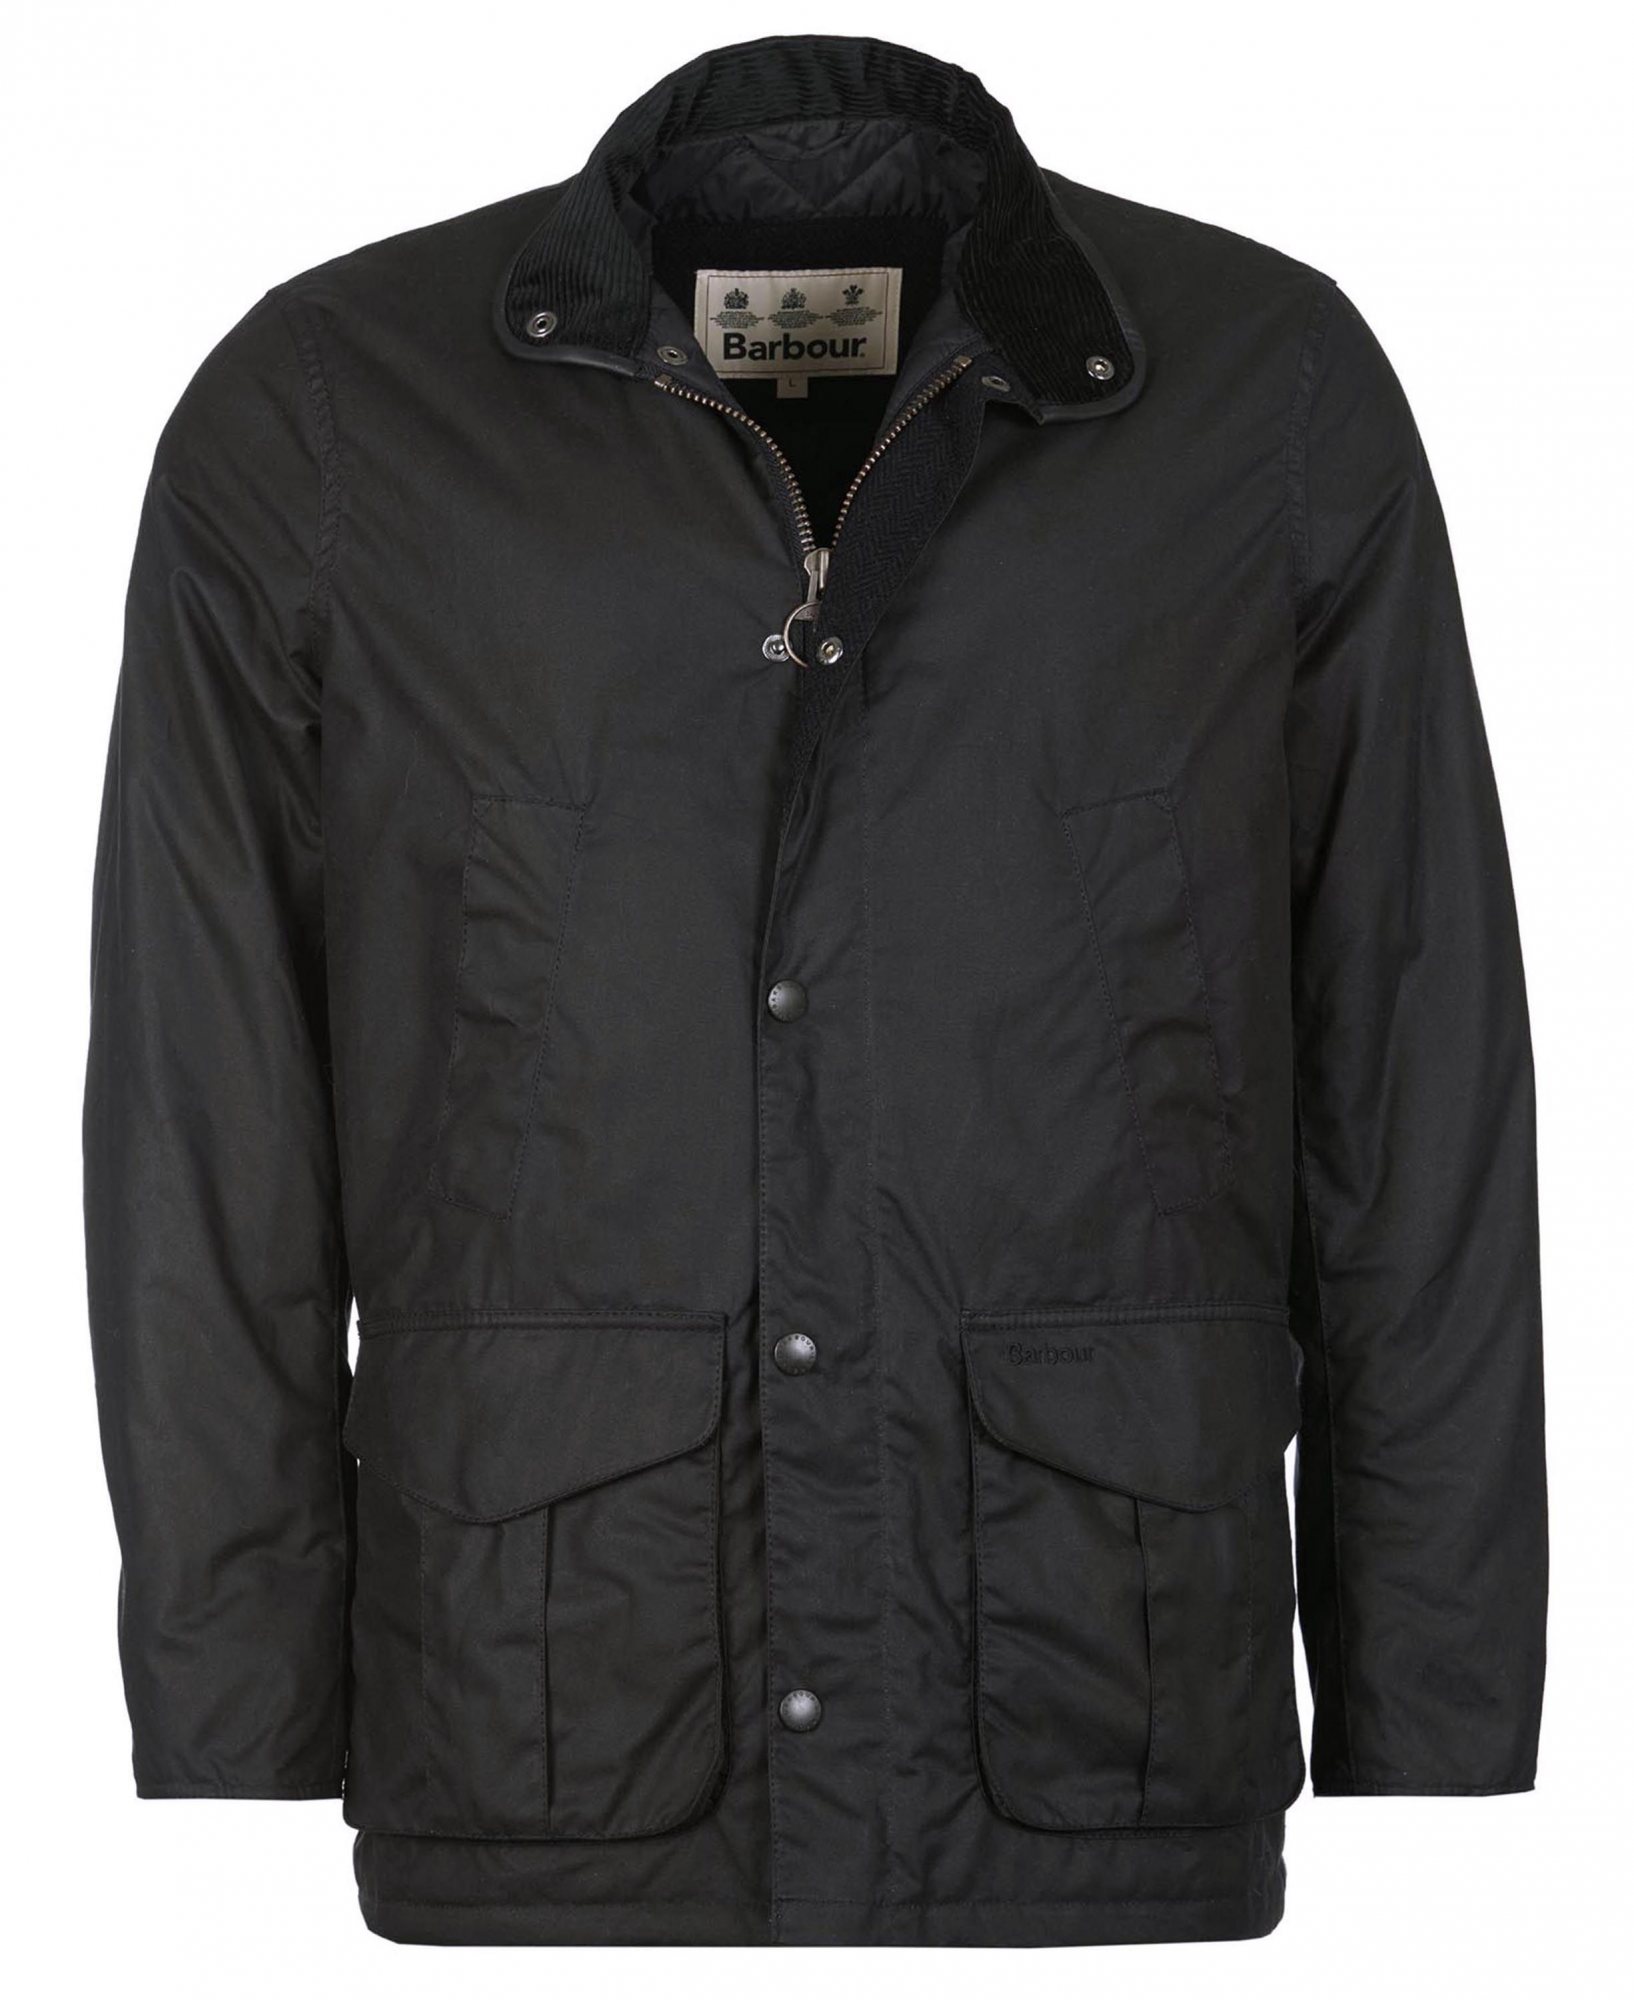 Barbour Hereford Mens Waxed Jacket - Robinsons Equestrian